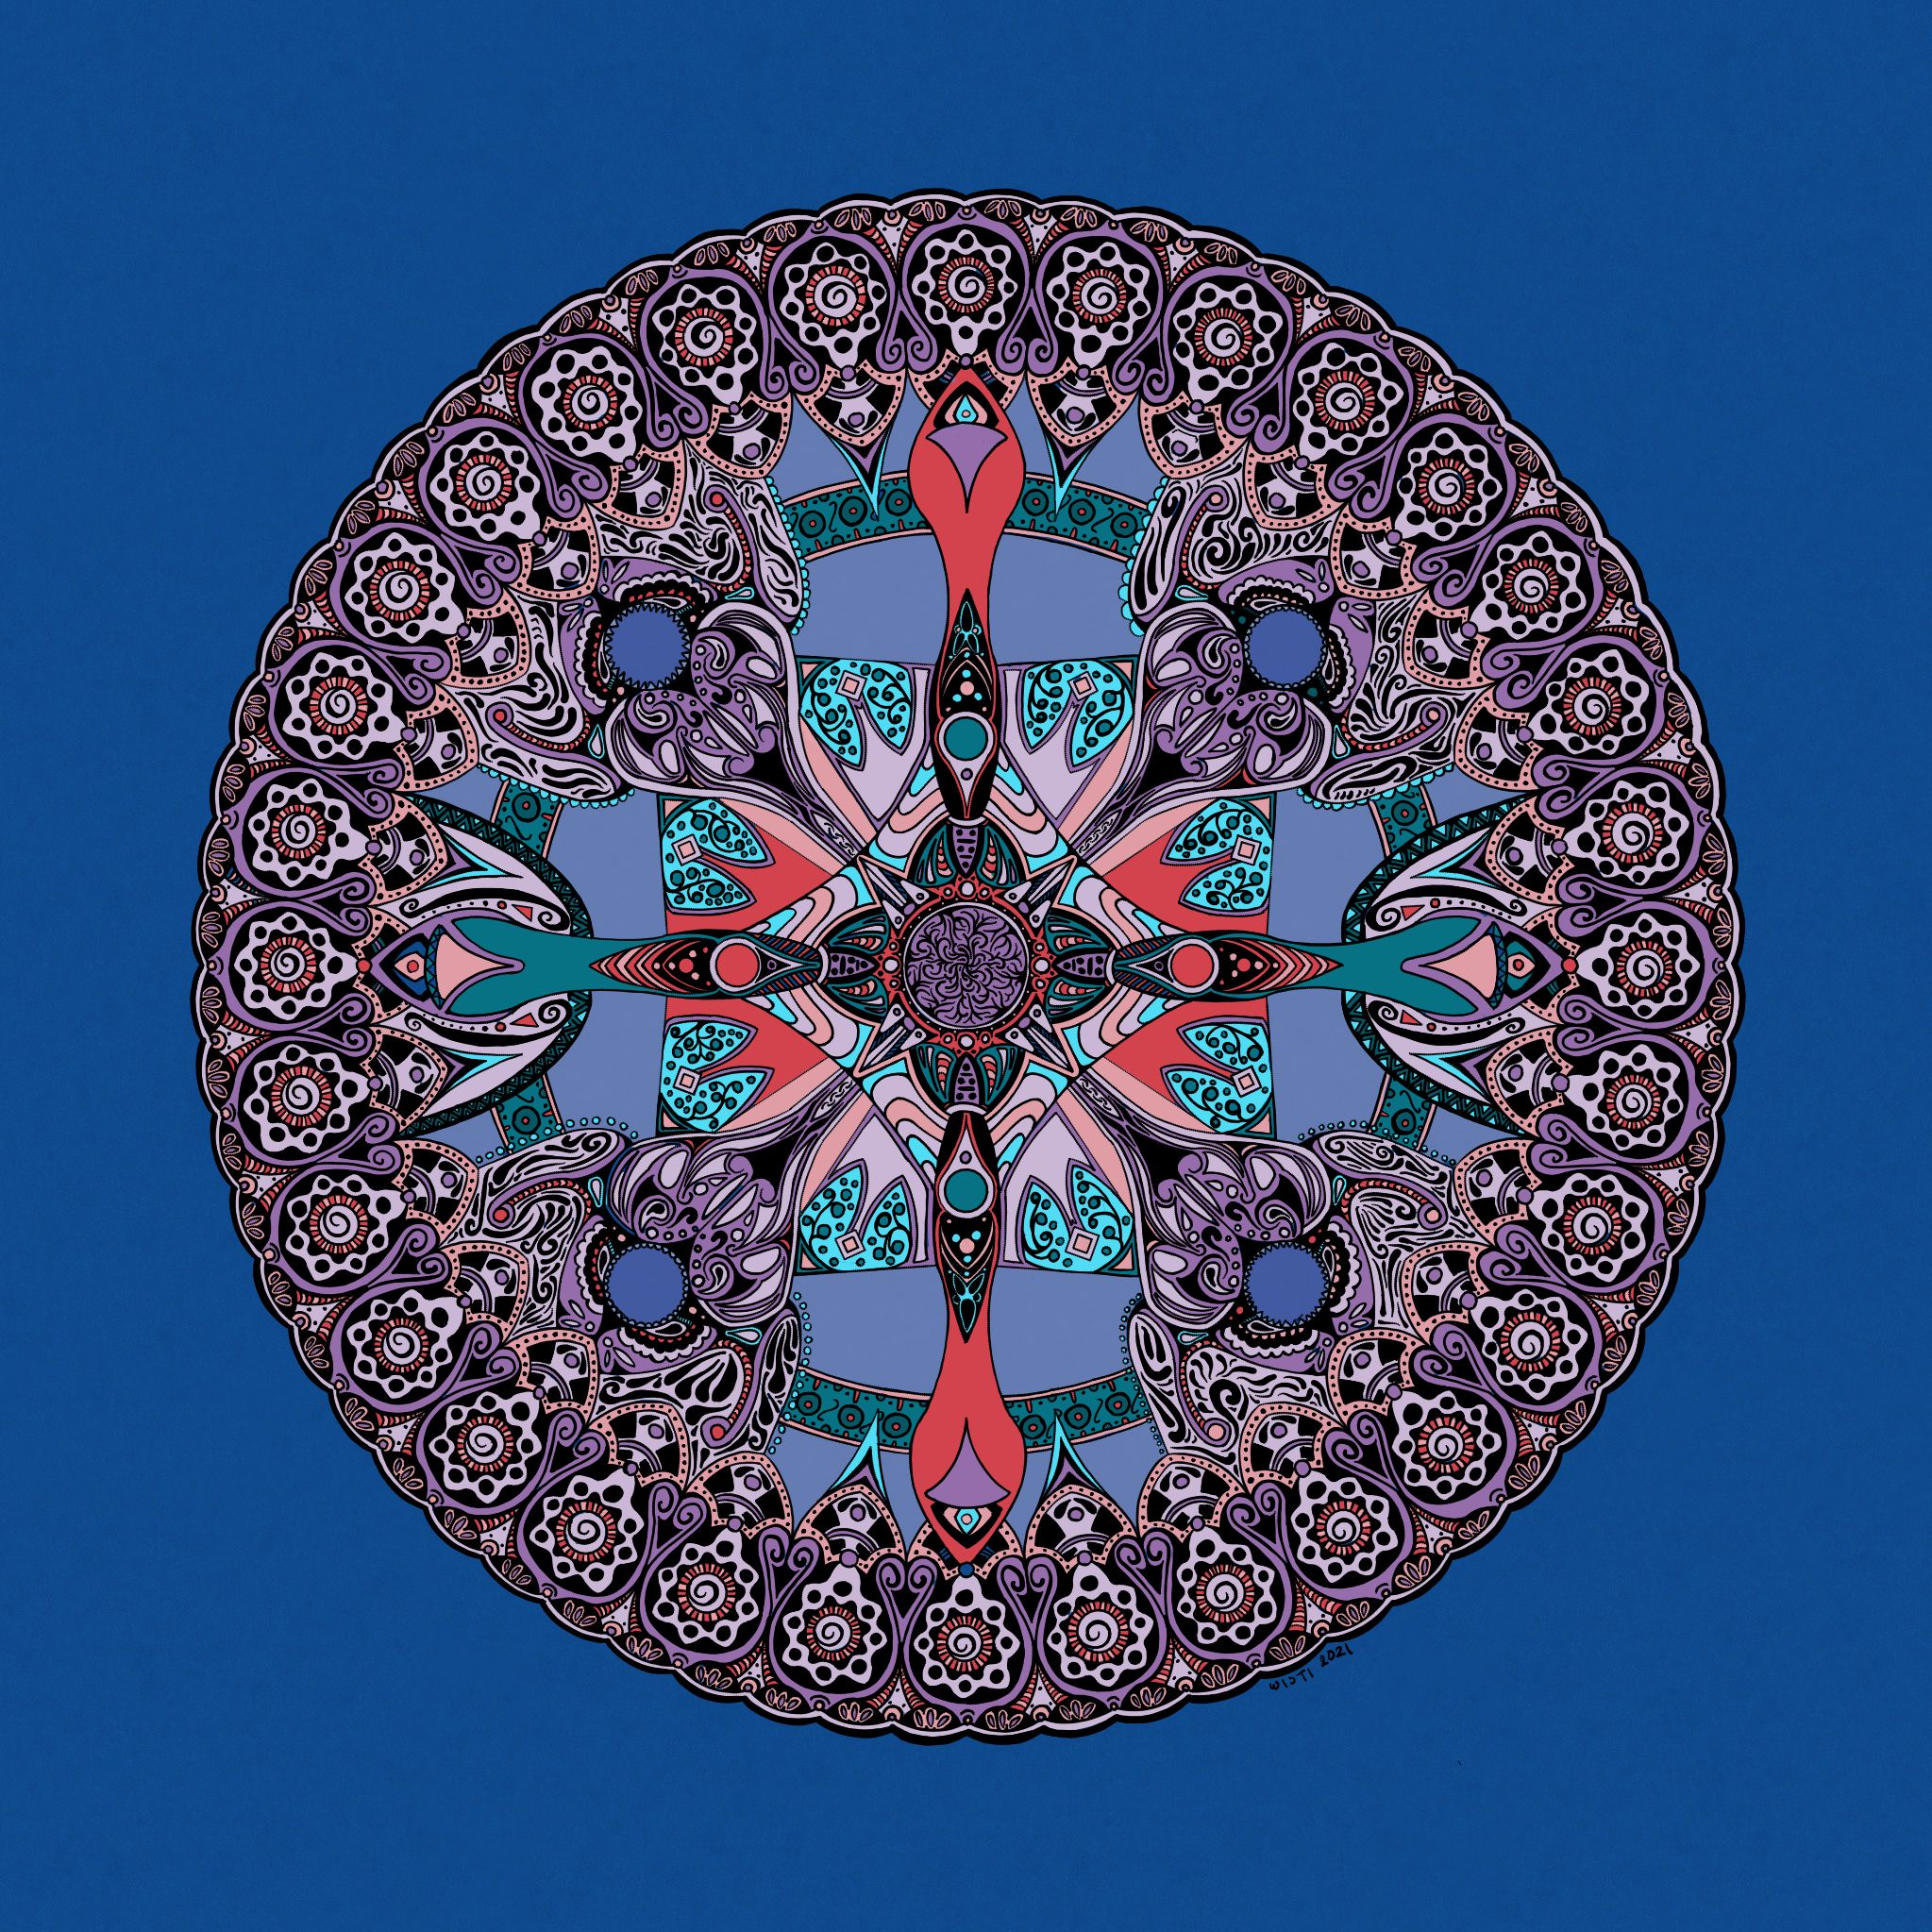 intricate art deco floral themed drawing in primarily purple tones on a blue background